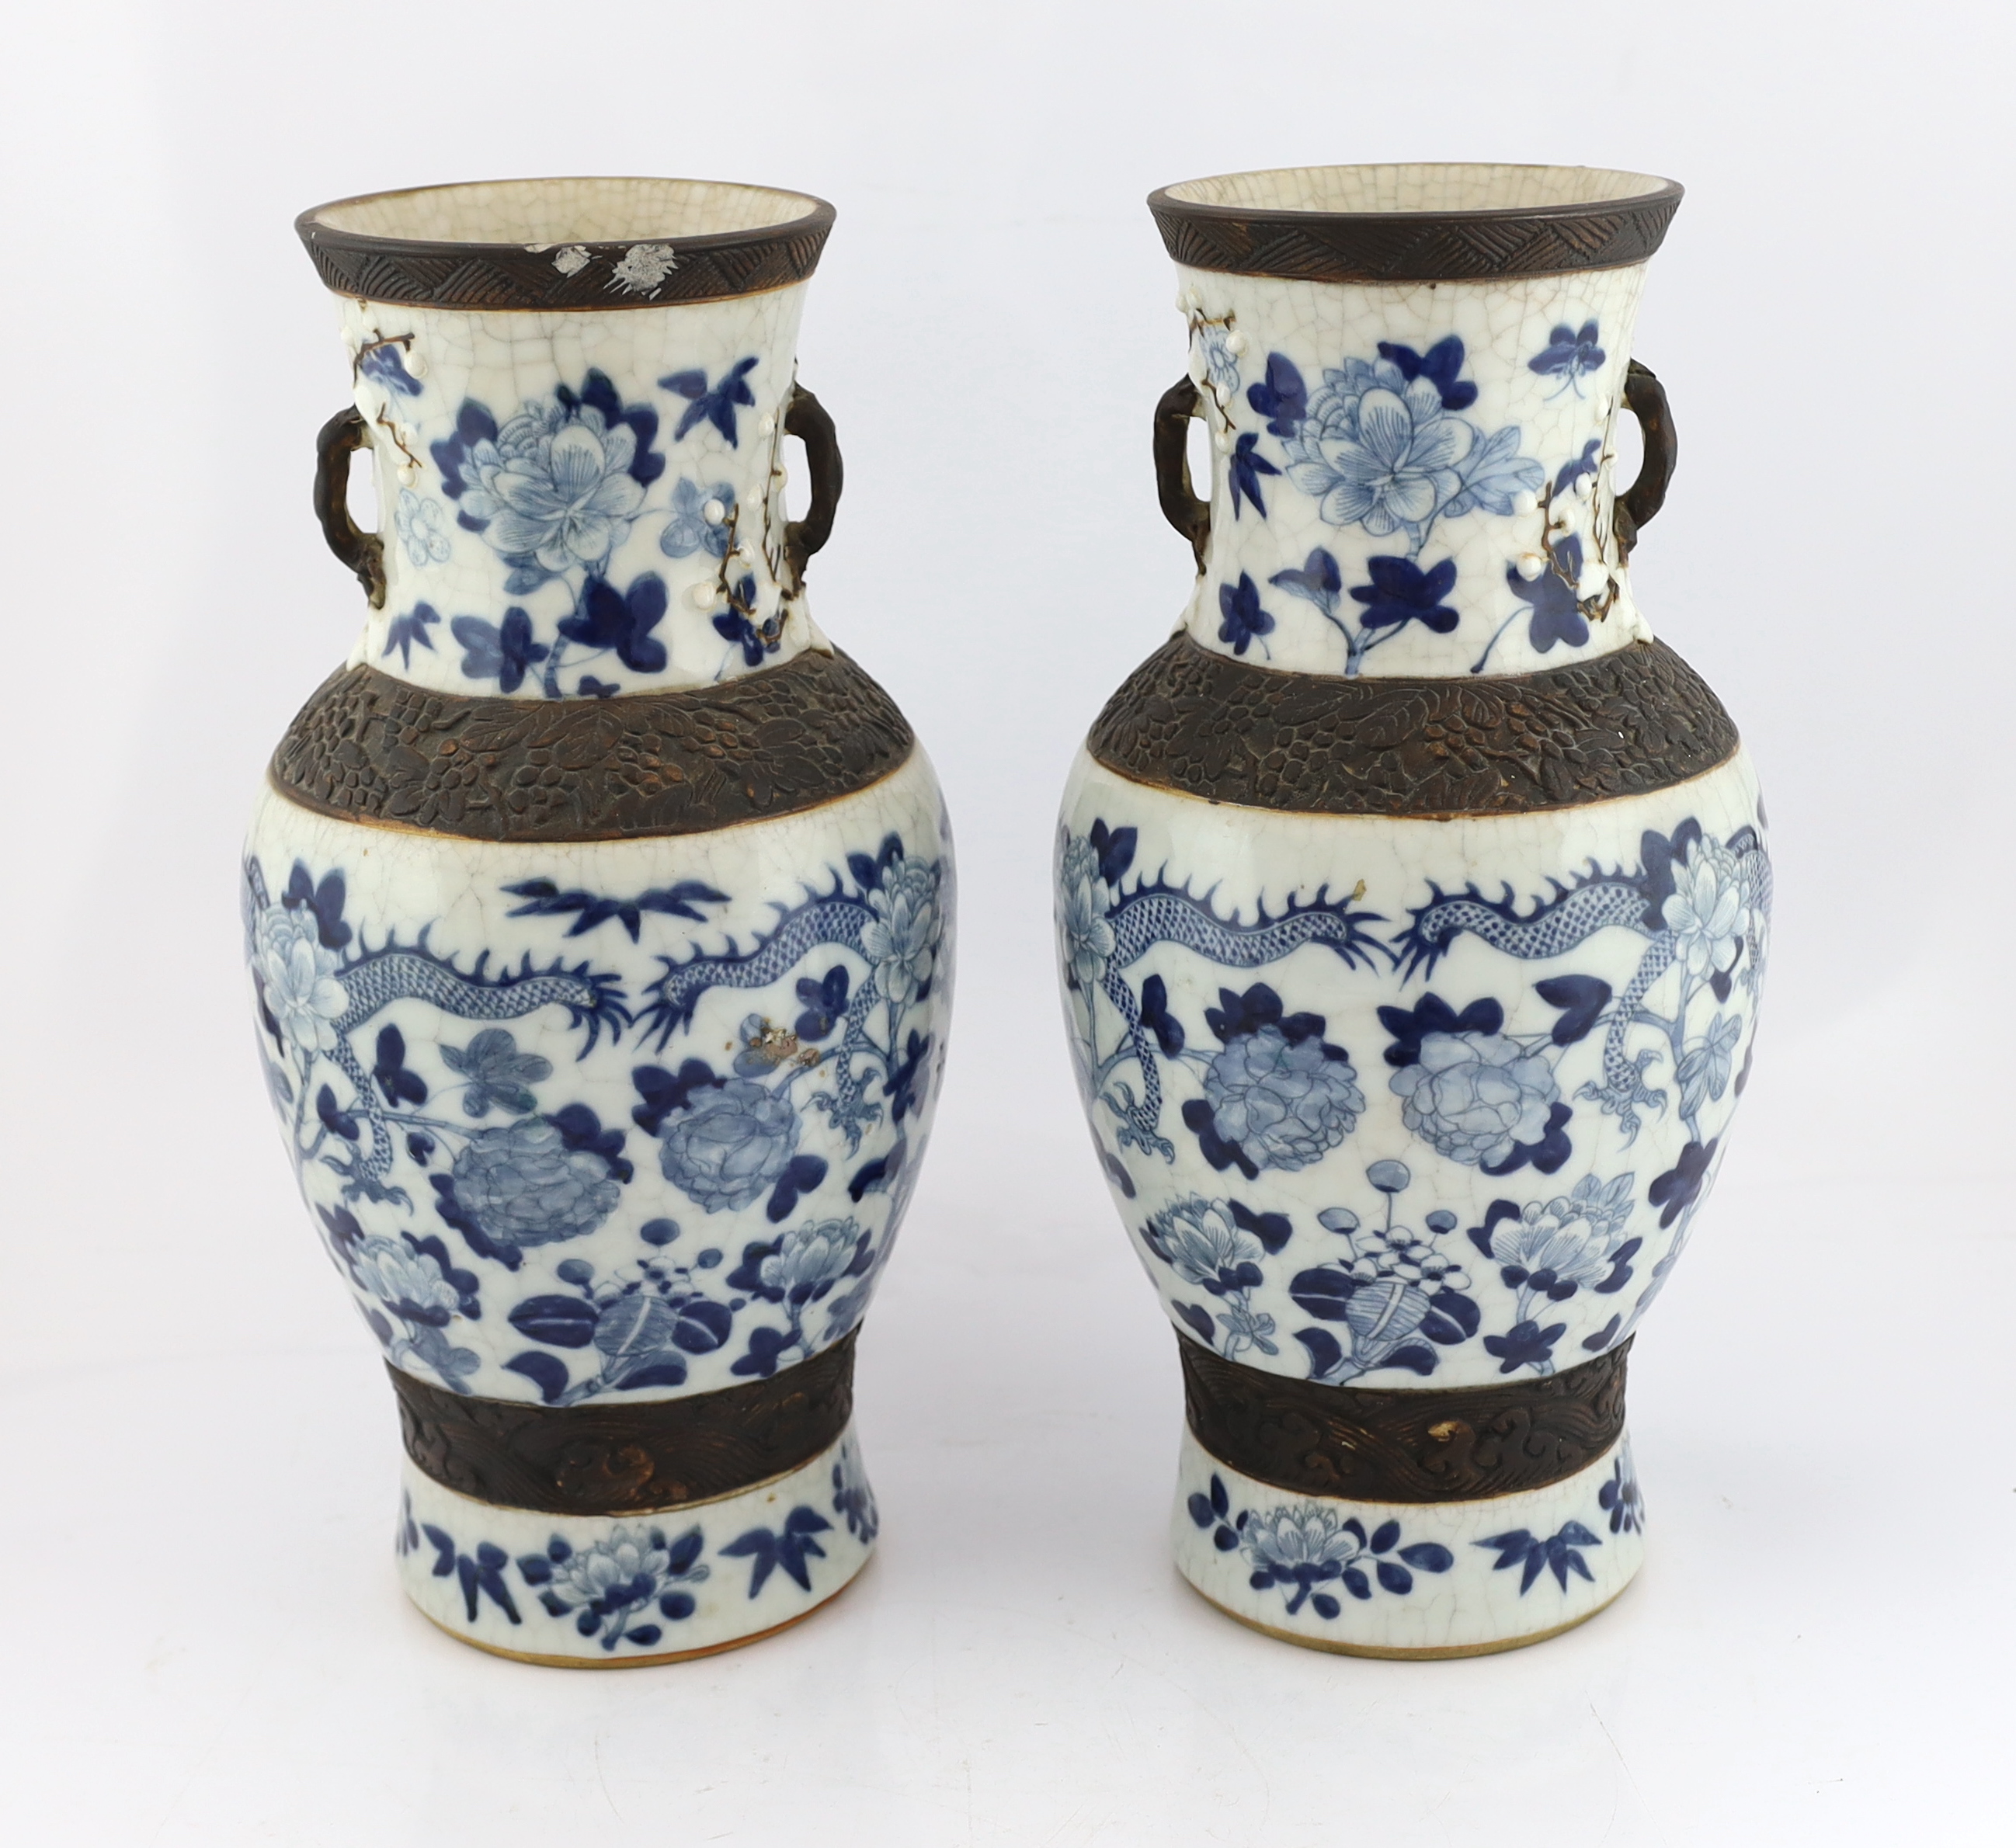 A pair of large Chinese blue and white crackle-glaze ‘dragon’ vases, early 20th century, each - Image 4 of 7